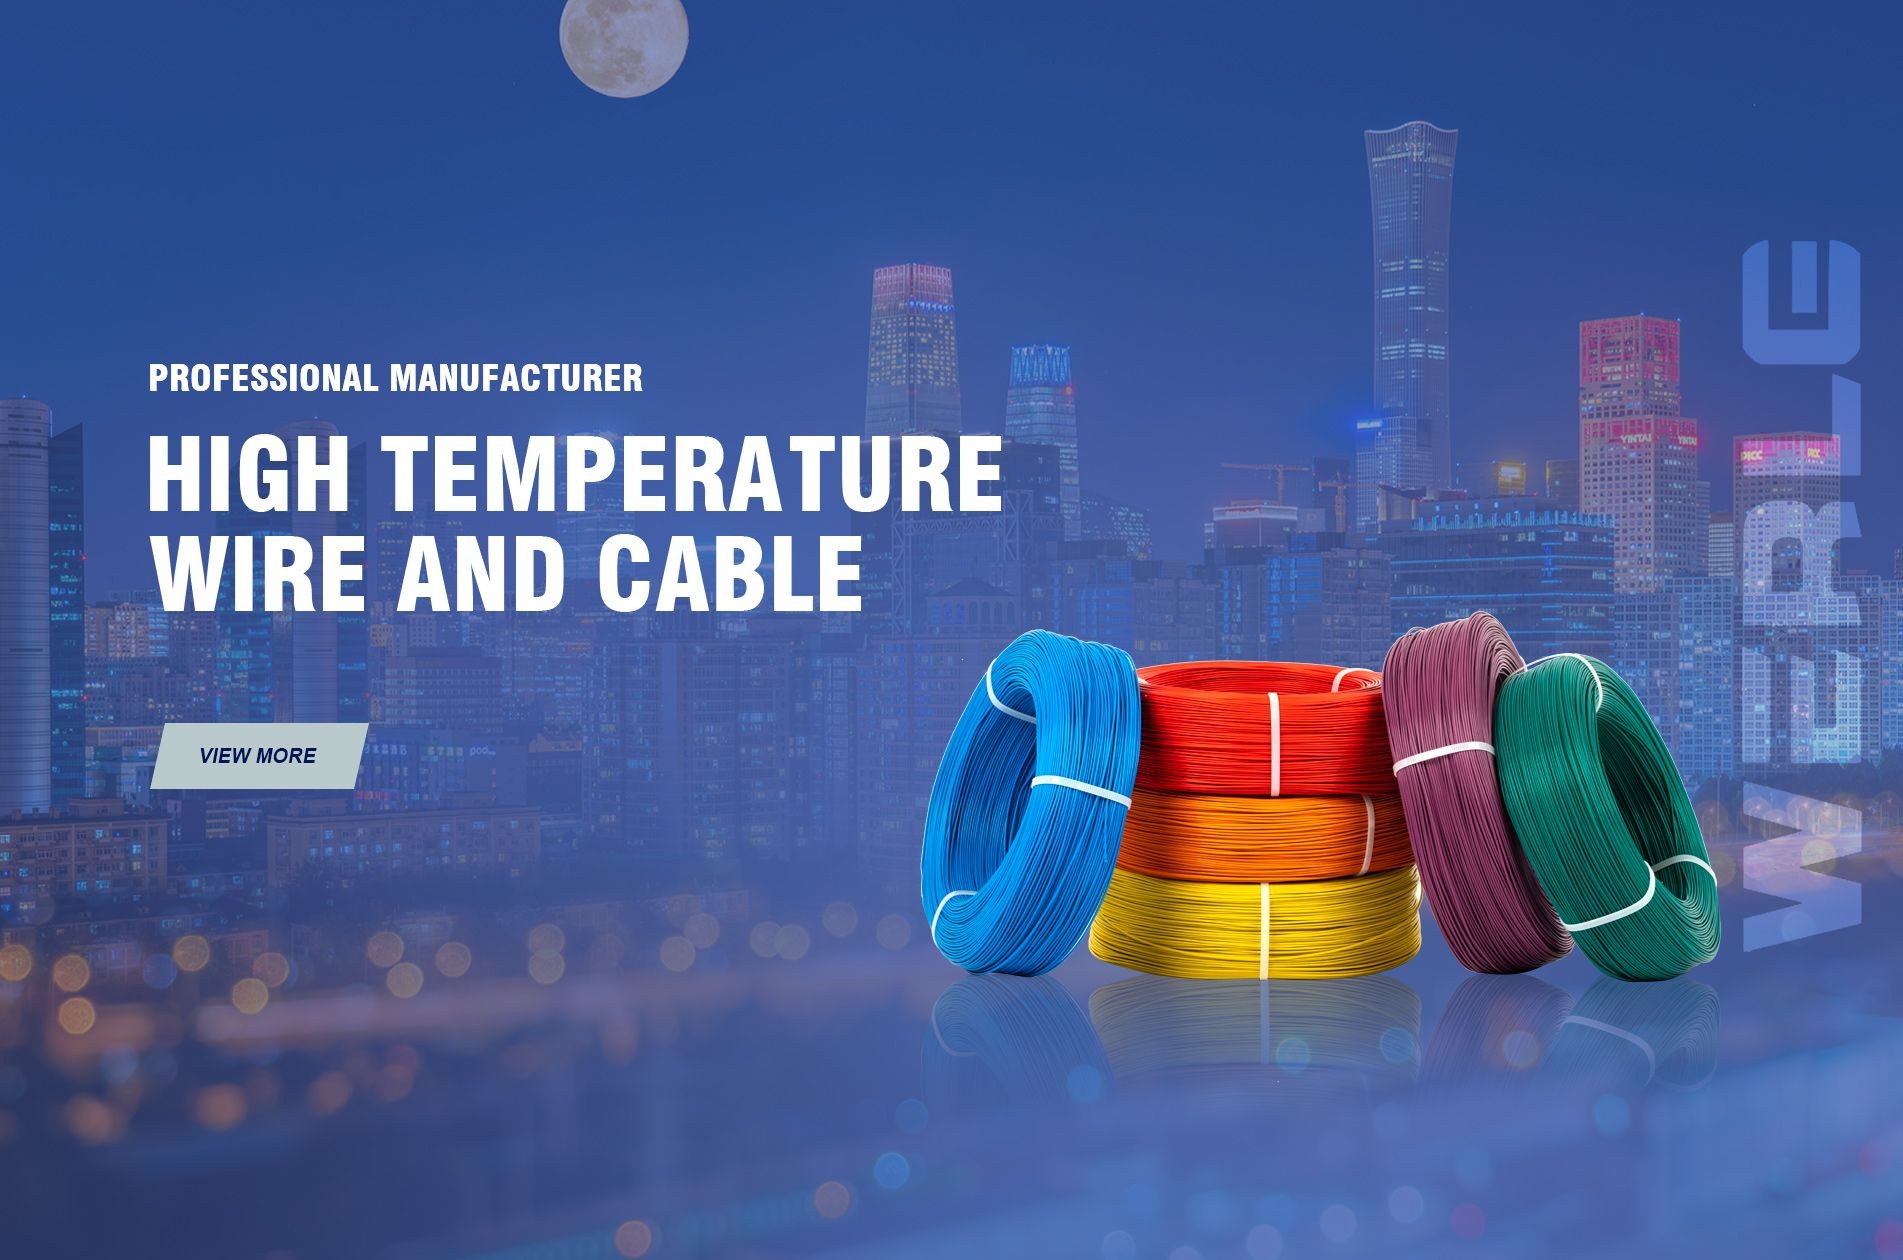 Zhejiang wrlong high temperature wire and cable co.,ltd